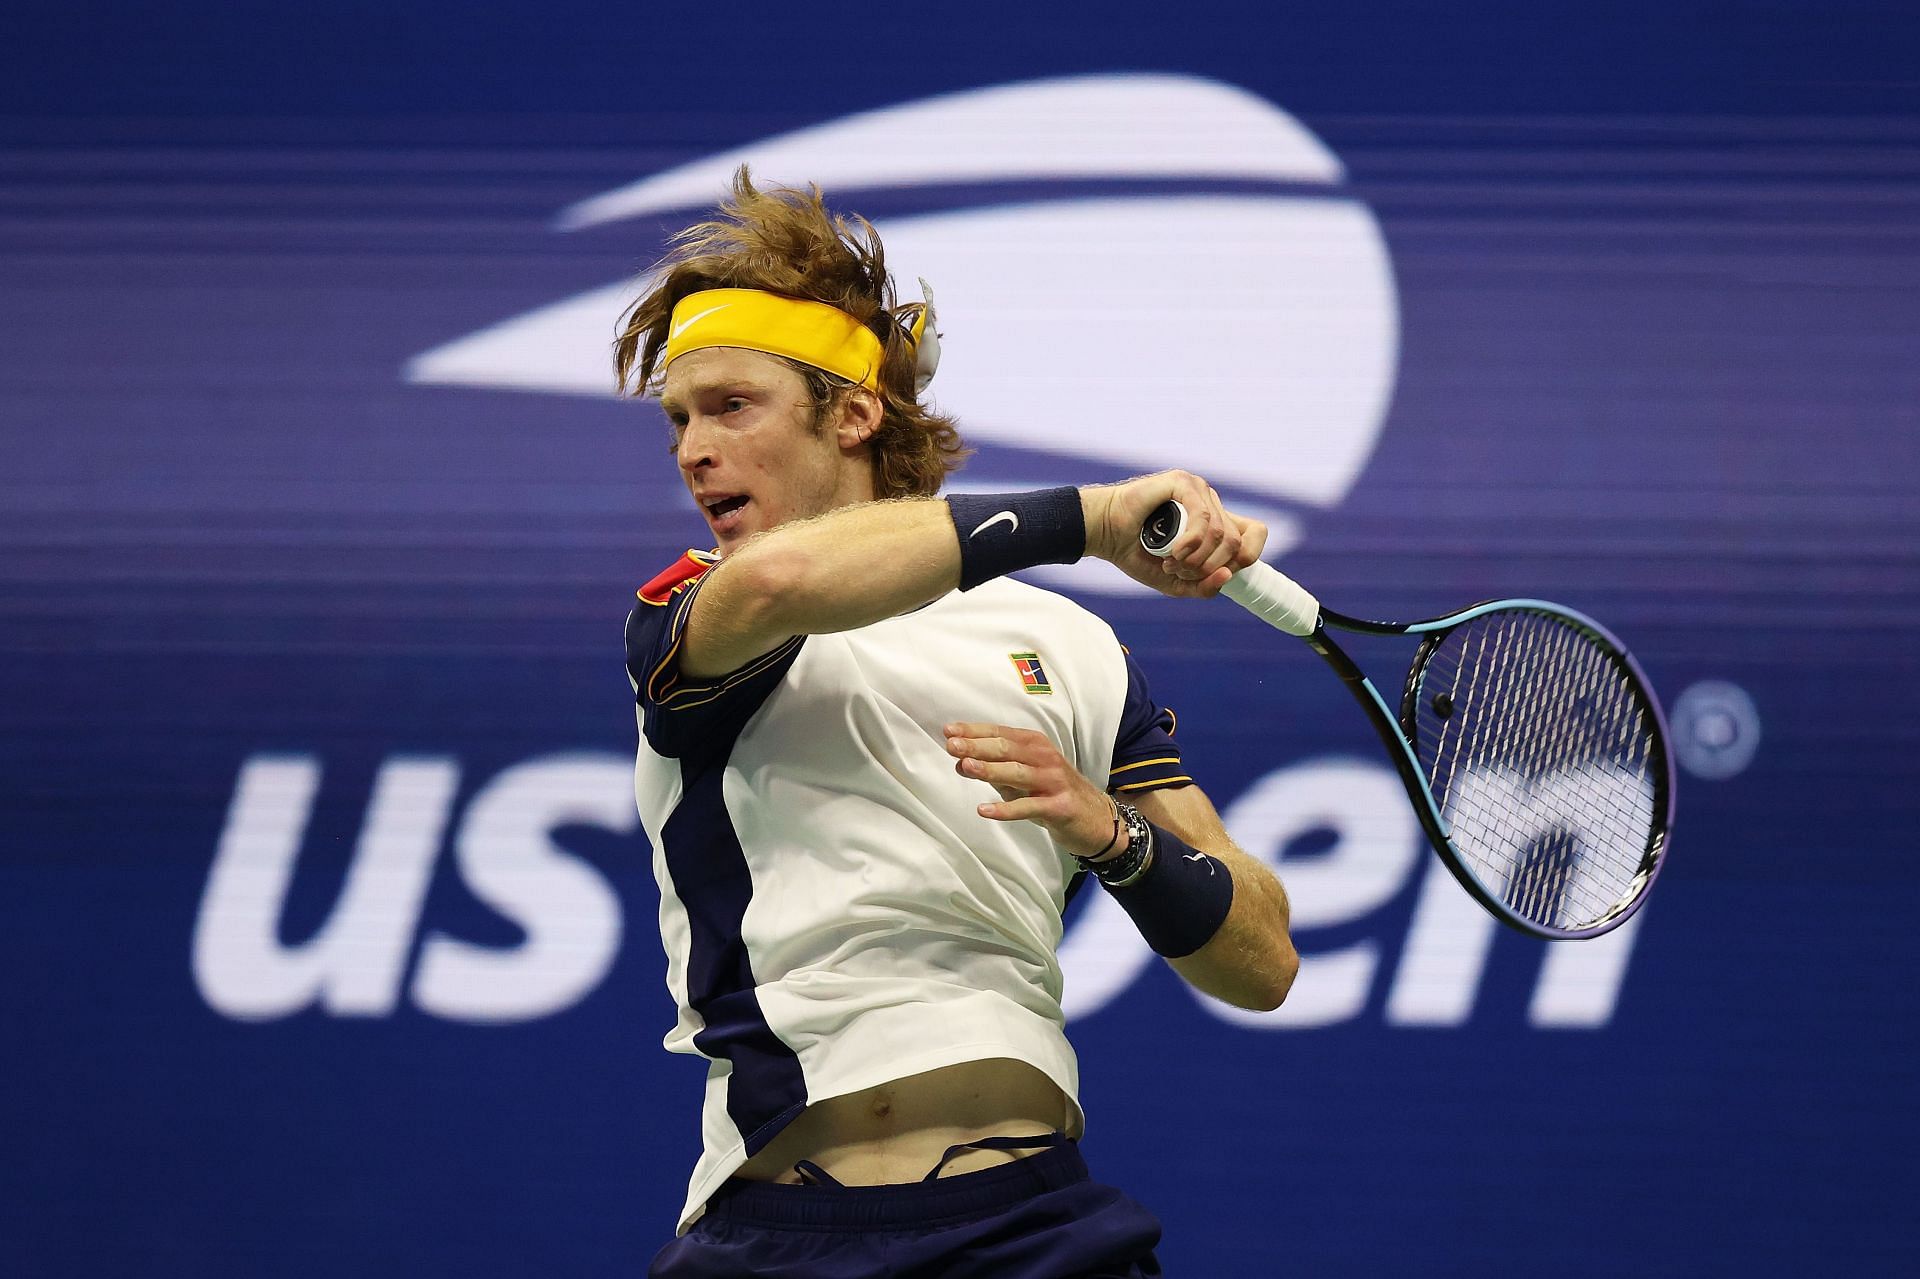 Andrey Rublev at the 2021 US Open.